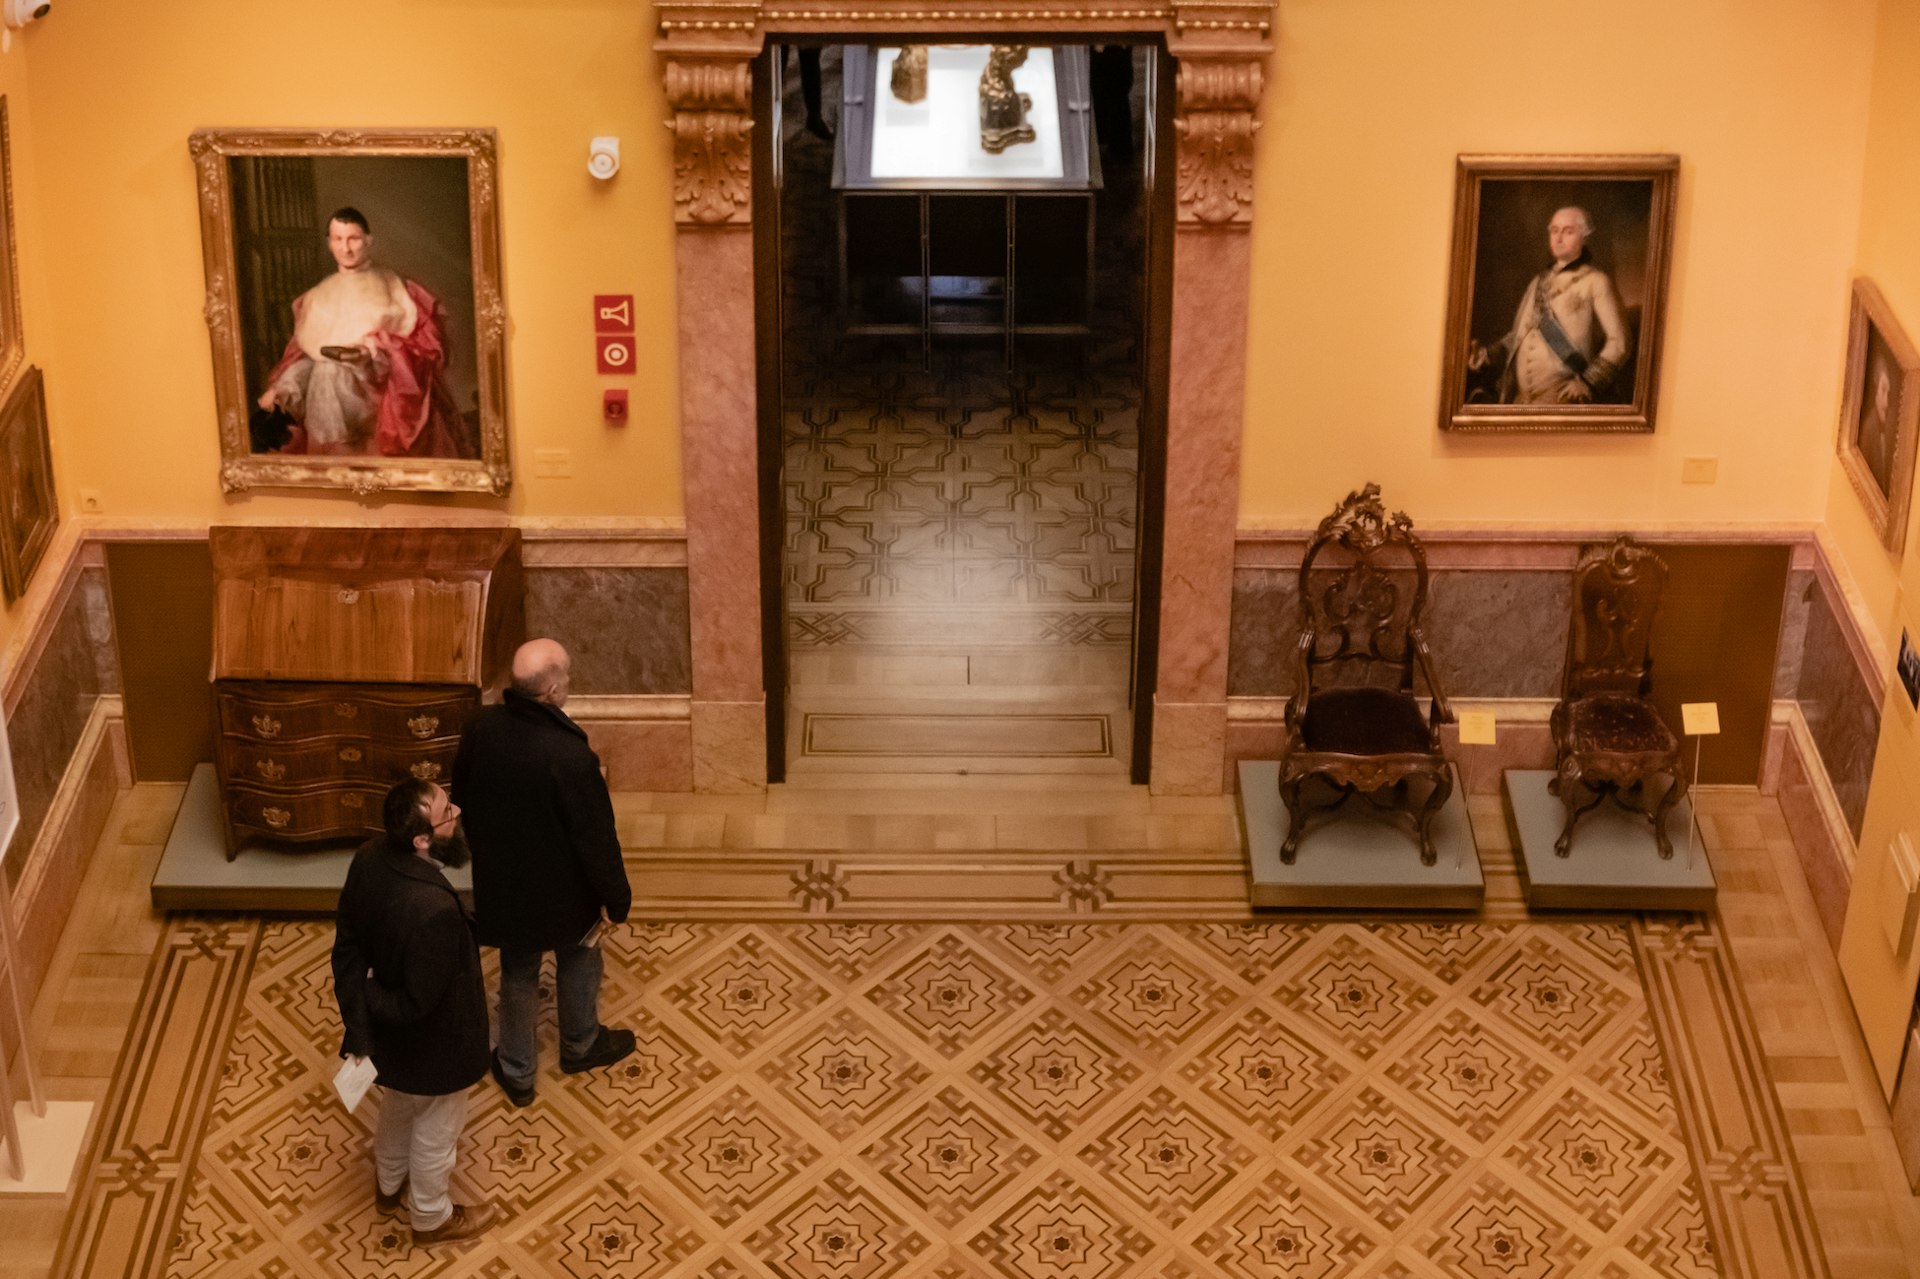 Seen from above, visitors admire paintings in the luxurious galleries of Museo Lázaro Galdiano, Madrid, Spain